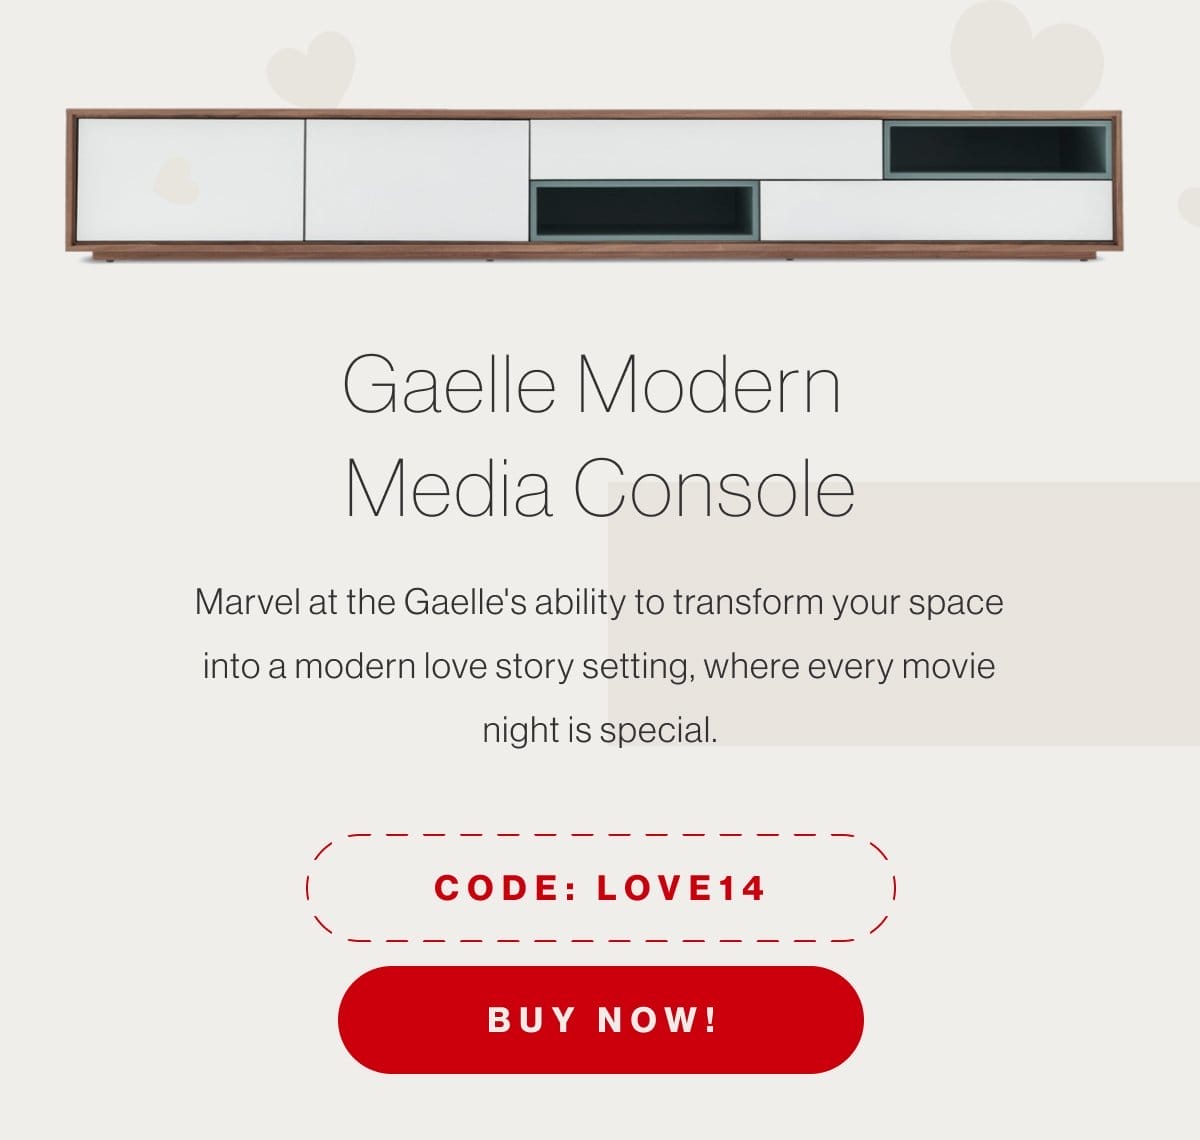 Gaelle Modern Media Console - Marvel at the Gaelle's ability to transform your space into a modern love story setting, where every movie night is special. - Code: LOVE14 - Buy Now!